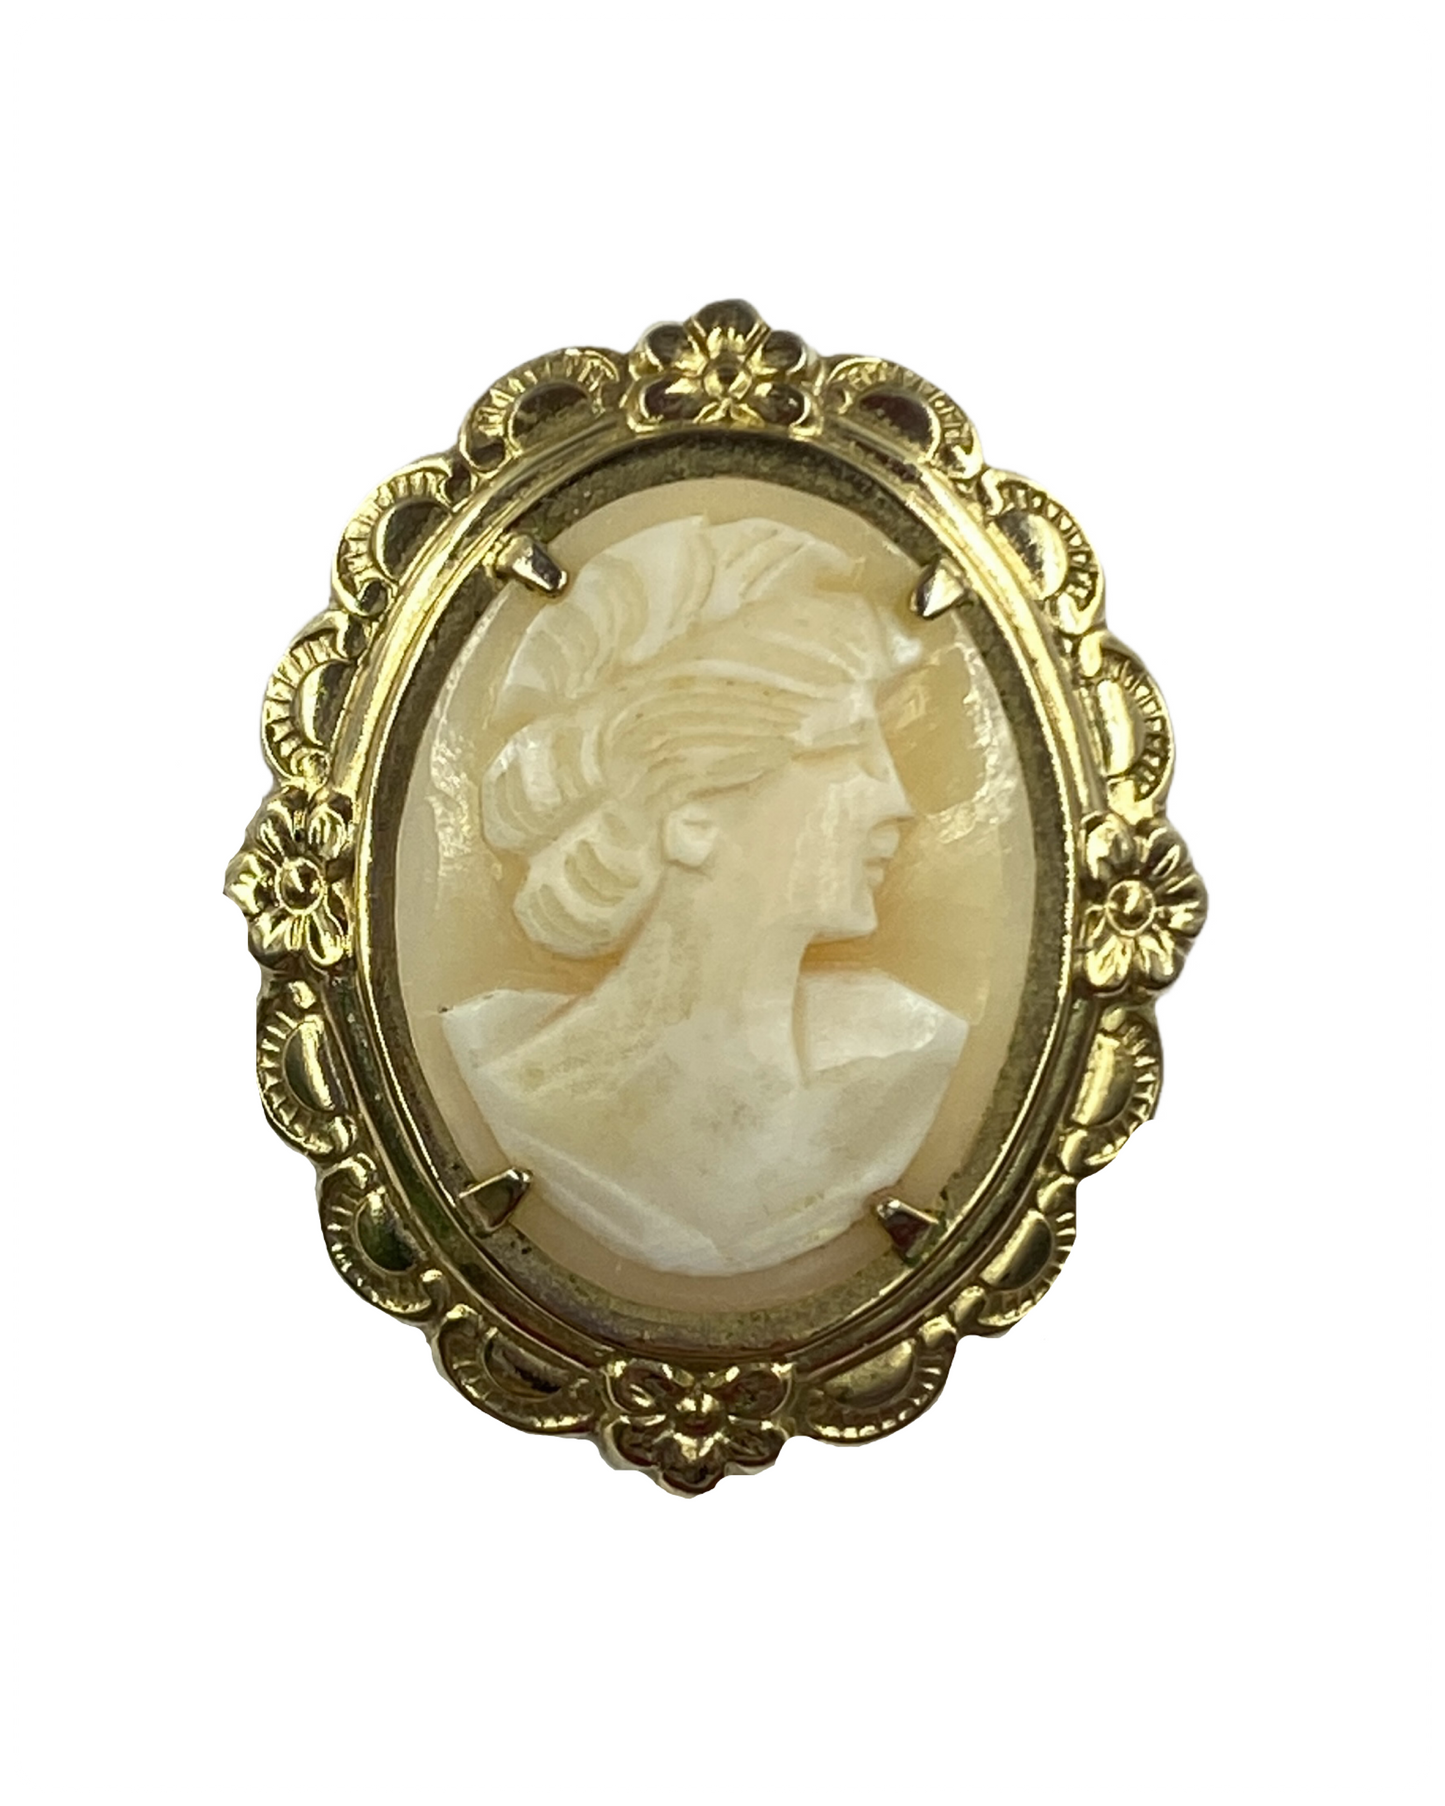 Vintage 1950s Pink & Gold Cameo Shell Brooch by Coro 